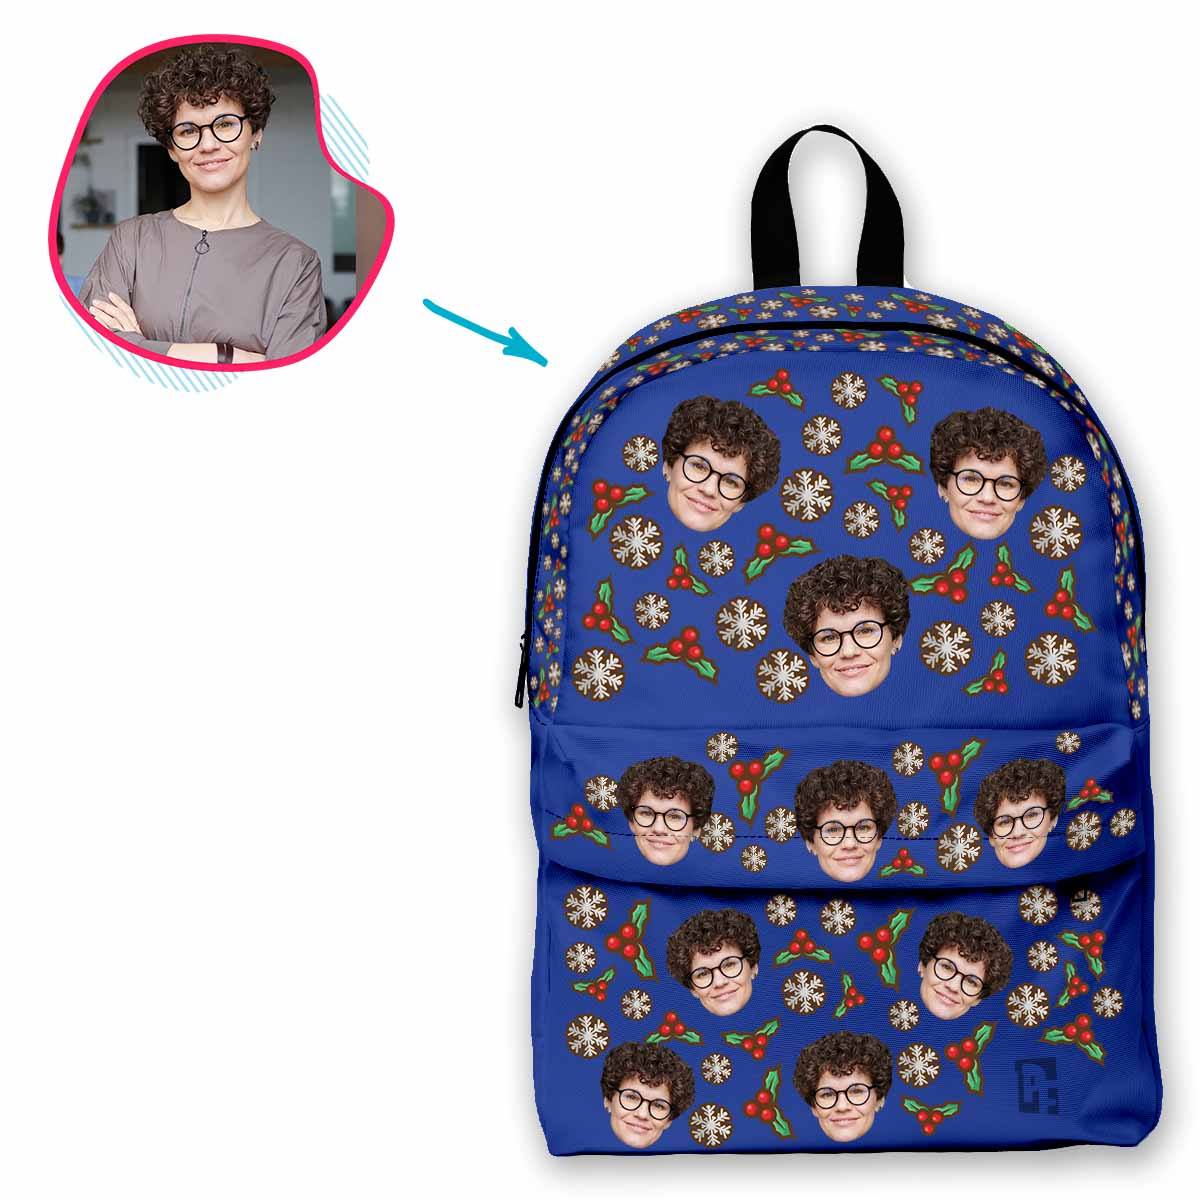 darkblue Mistletoe classic backpack personalized with photo of face printed on it